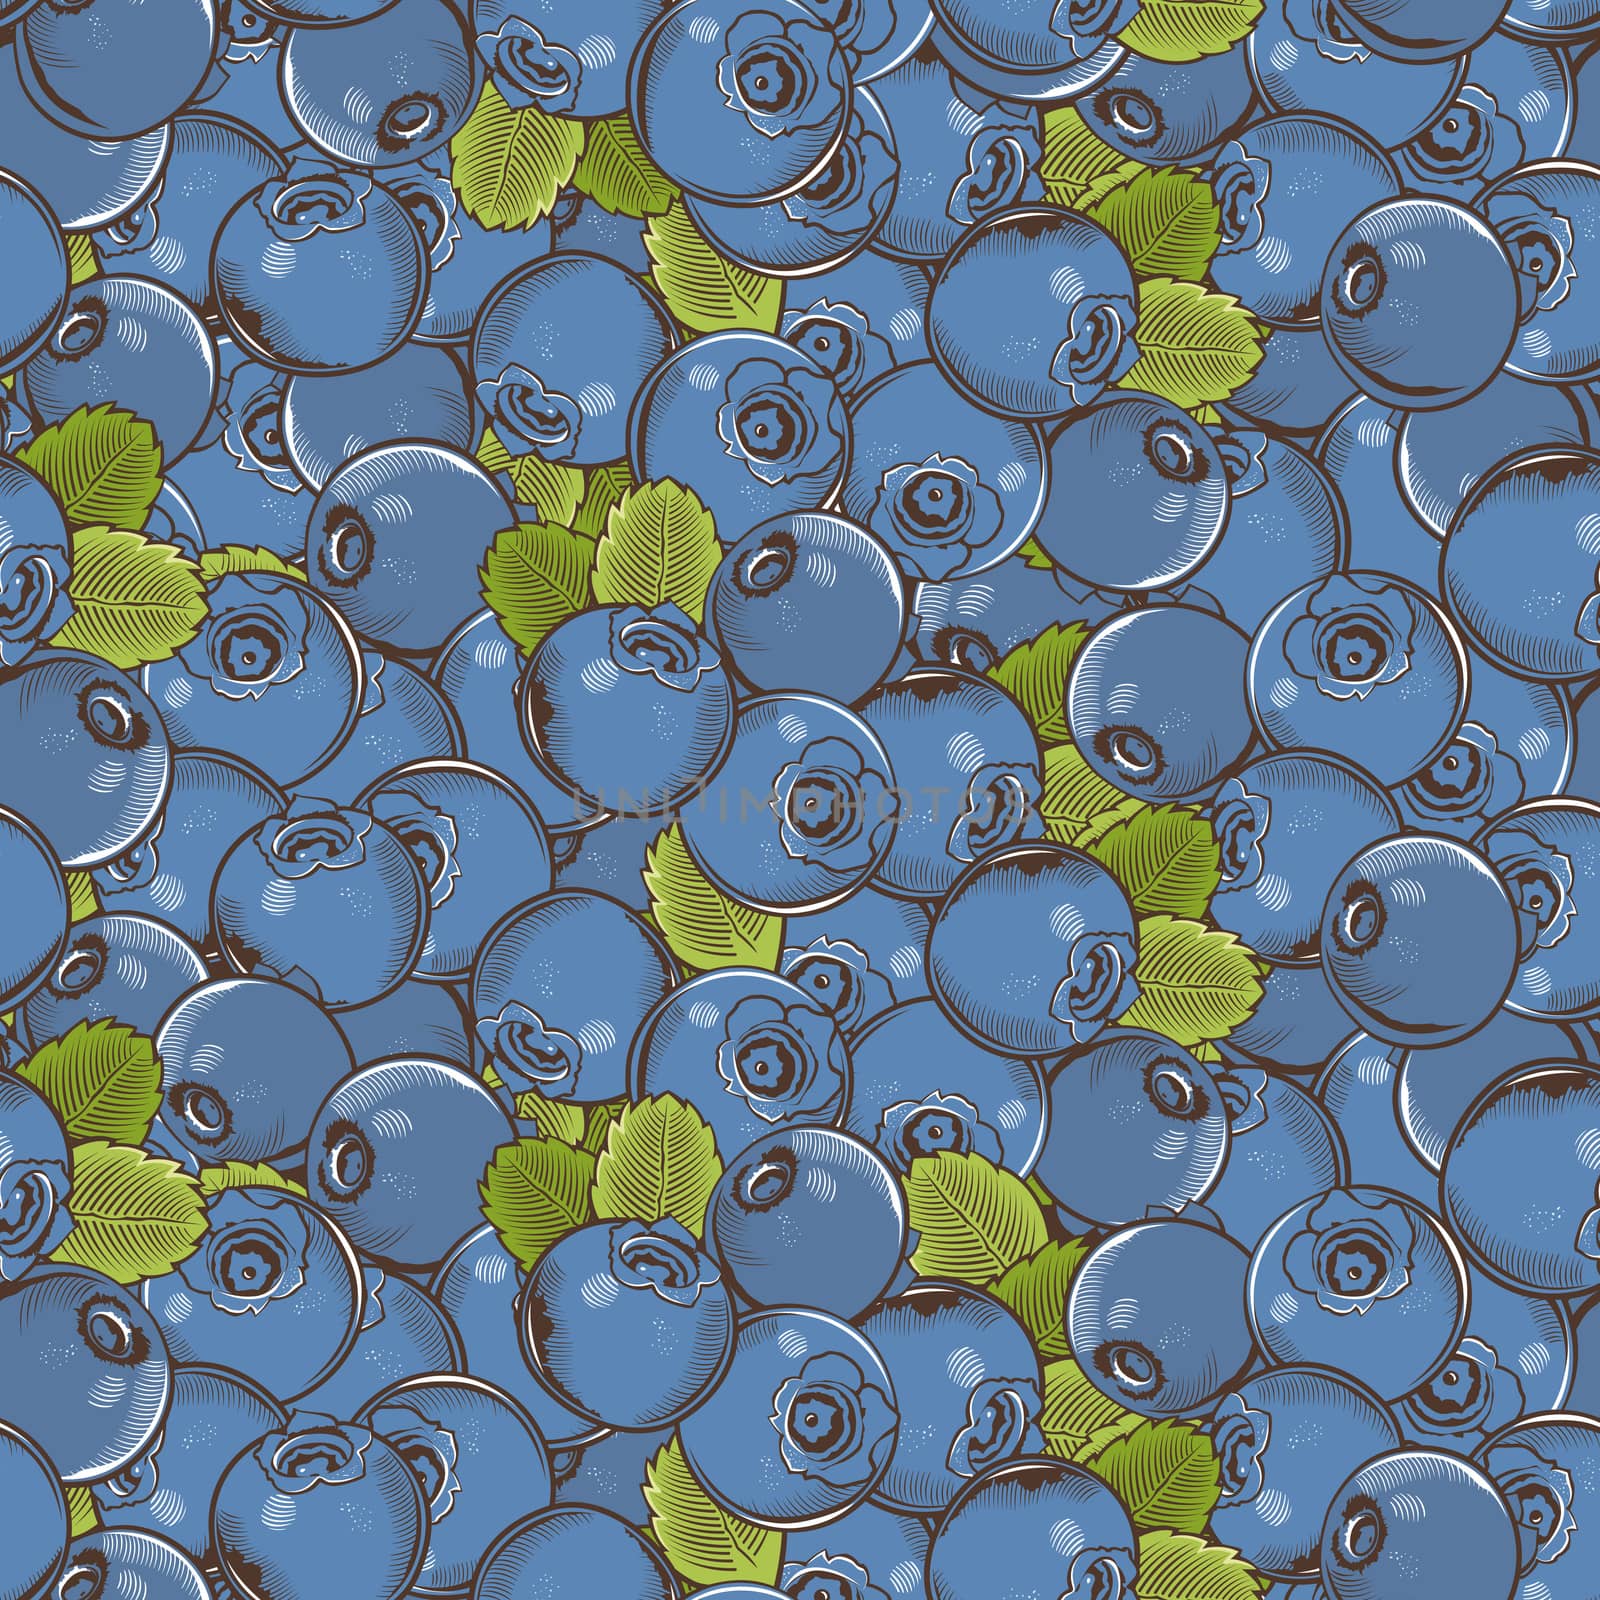 Vintage Bilberry Seamless Pattern by ConceptCafe